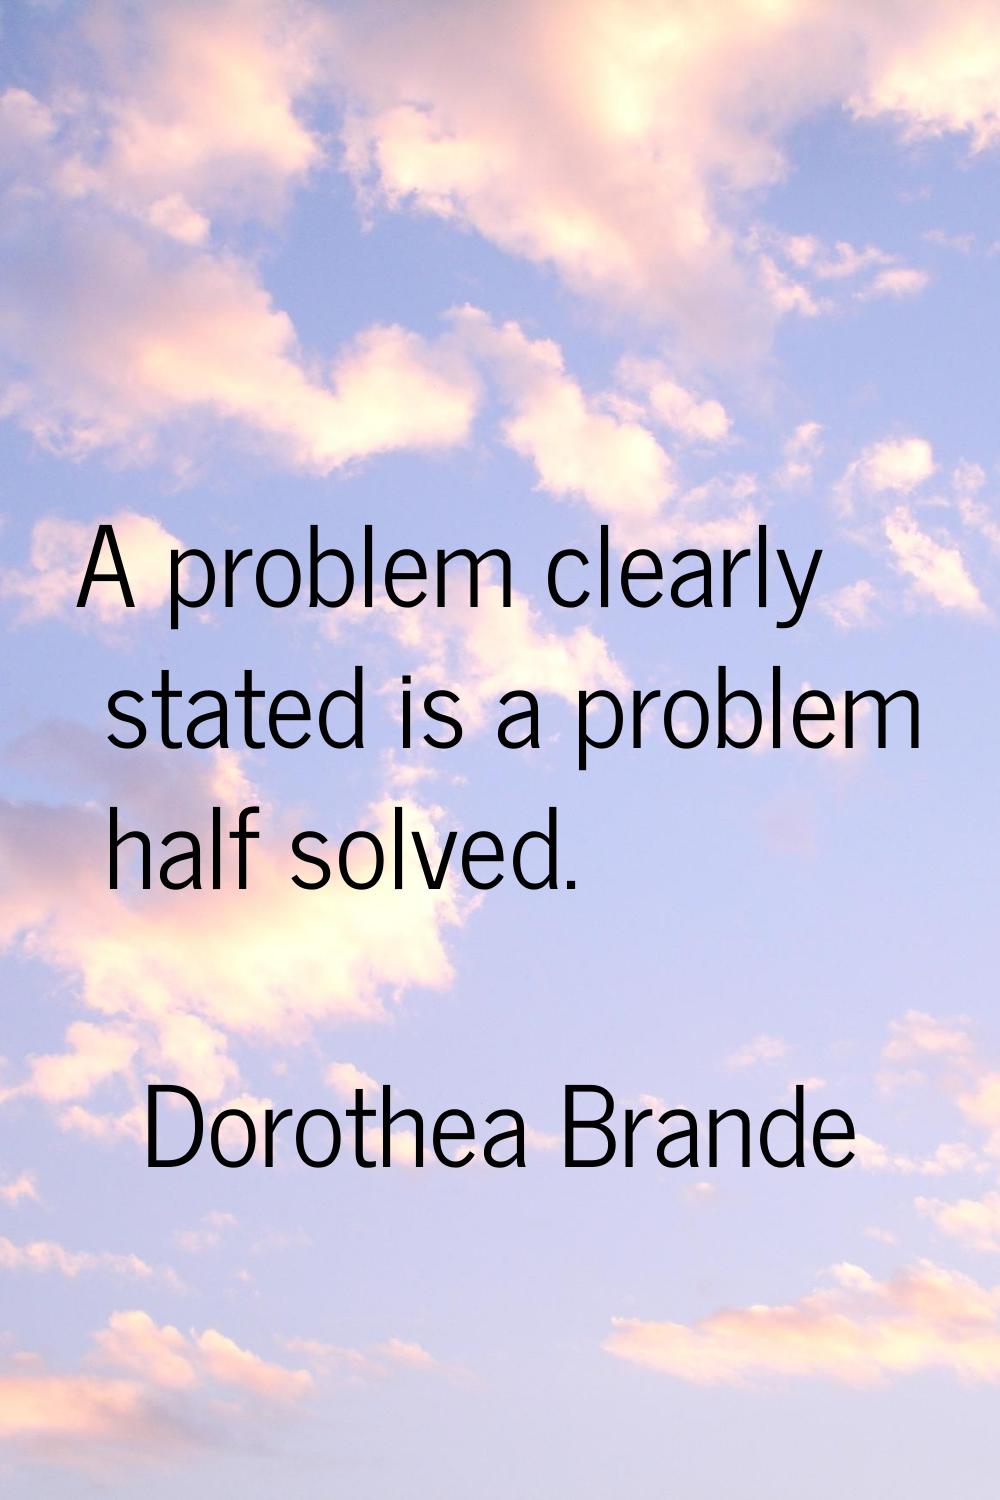 A problem clearly stated is a problem half solved.